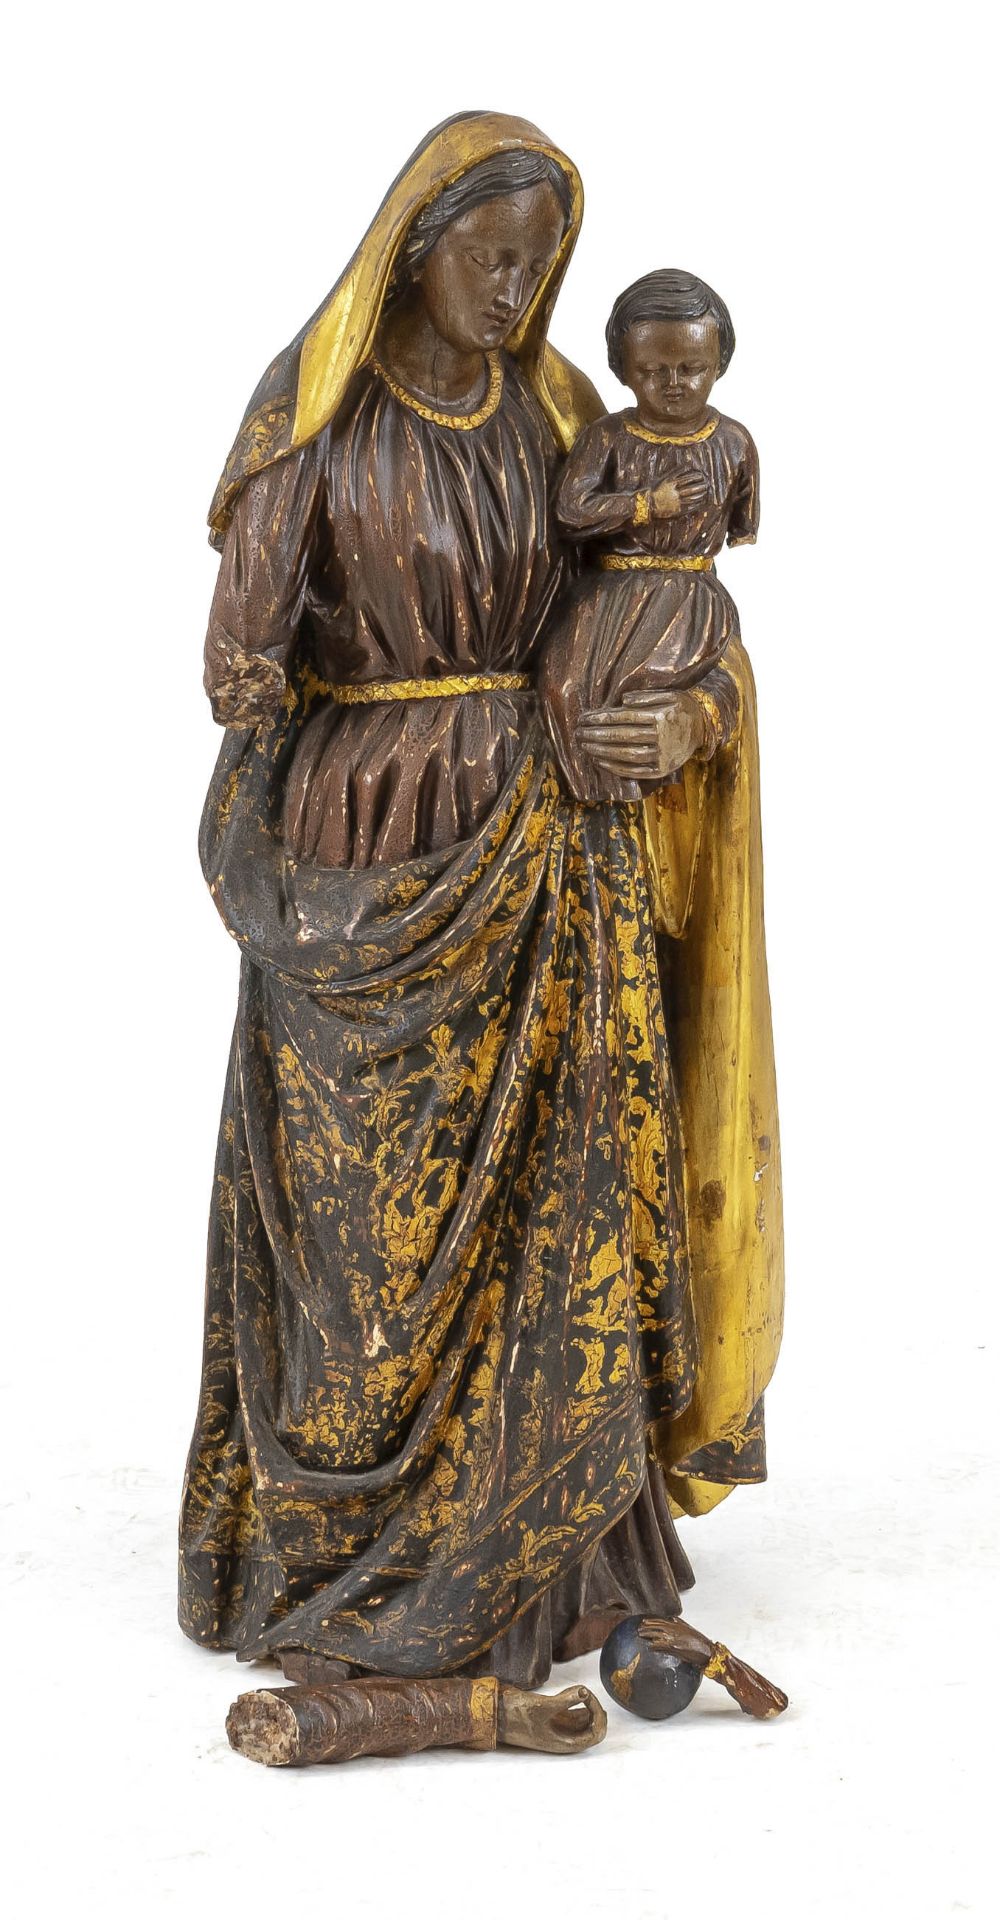 19th century sculptor, large devotional figure of a Madonna with the infant Jesus in her arms, fully